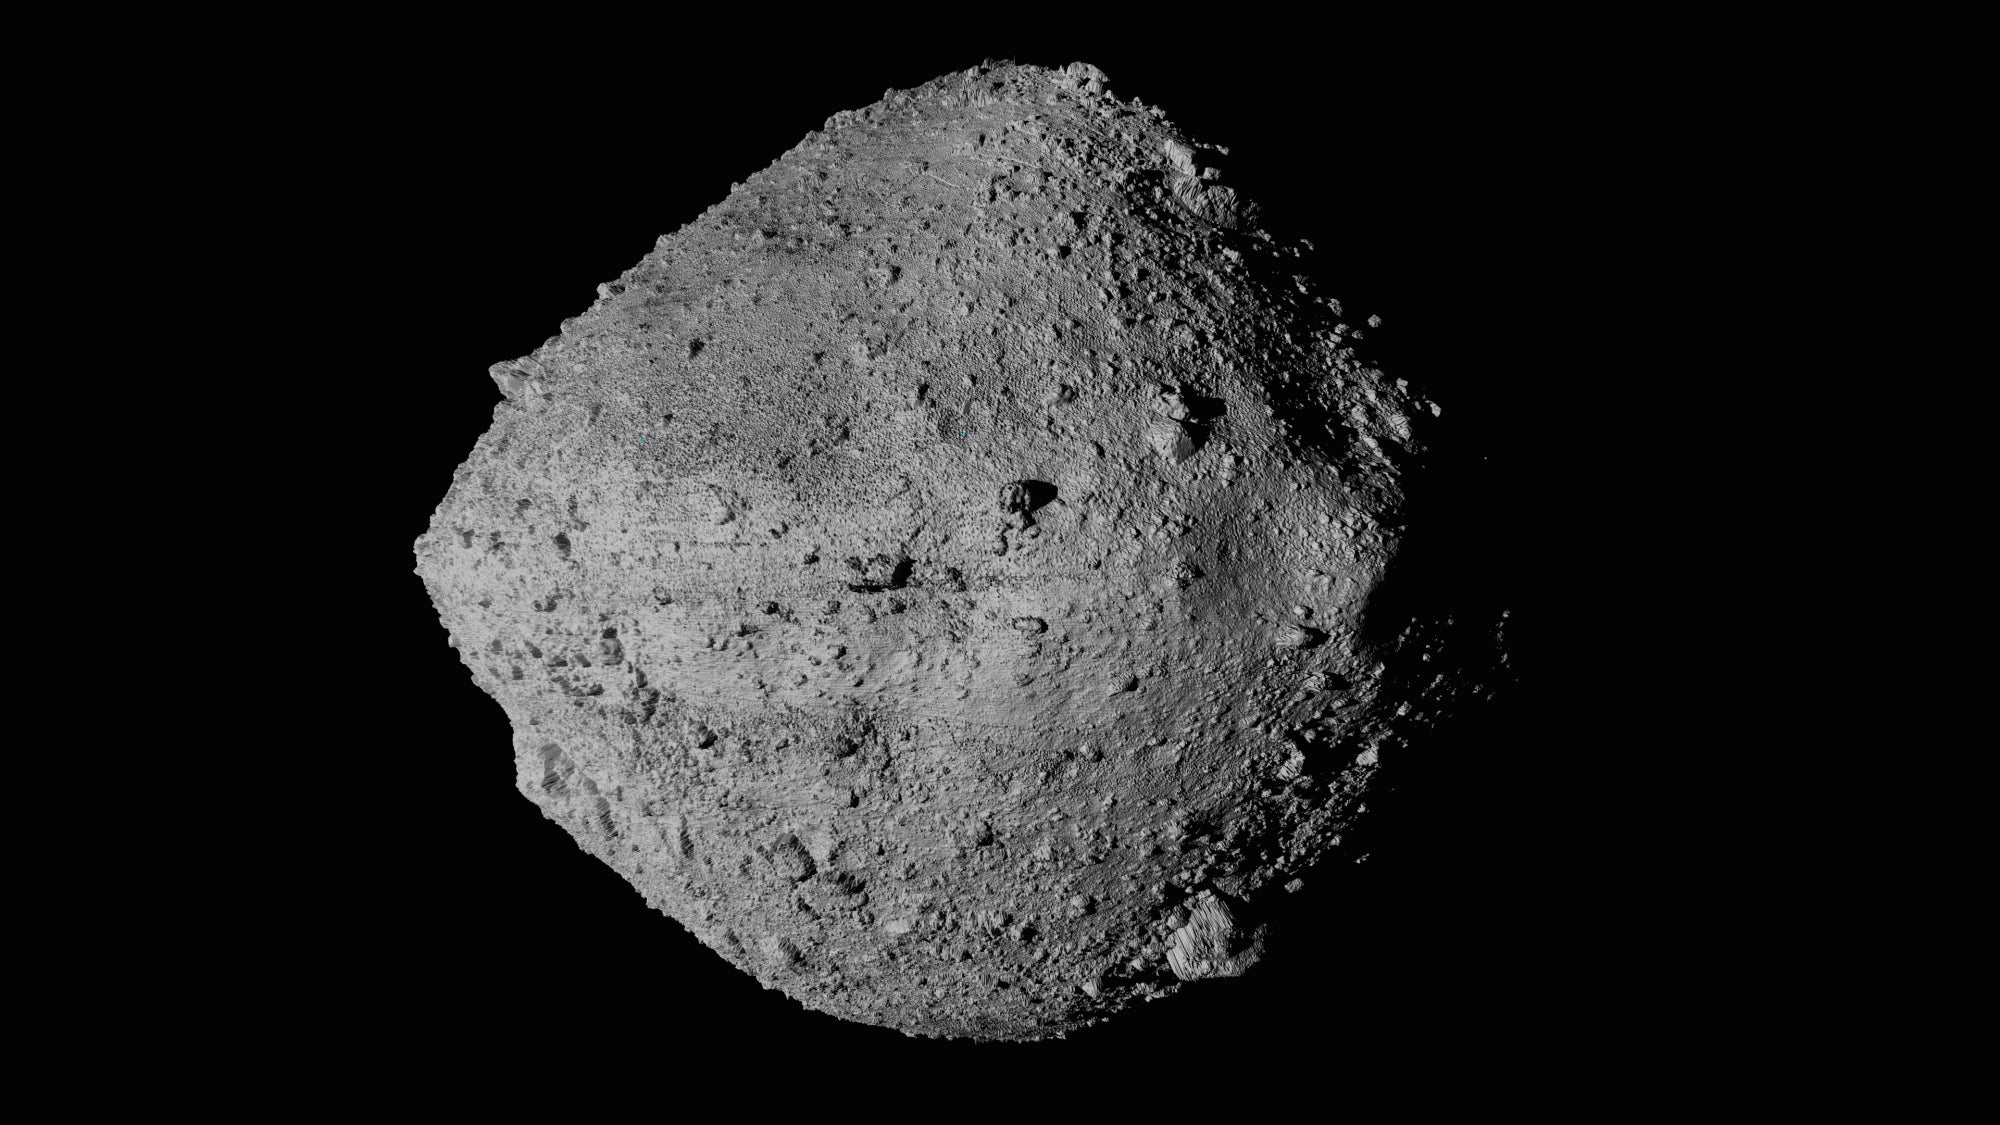 pa ready, asteroid bennu, earth, osiris-rex, nasa, natural history museum, scientists, open university, oxford university, asteroid, uk scientists studying ‘teaspoon-sized’ sample from asteroid bennu to understand origin of life